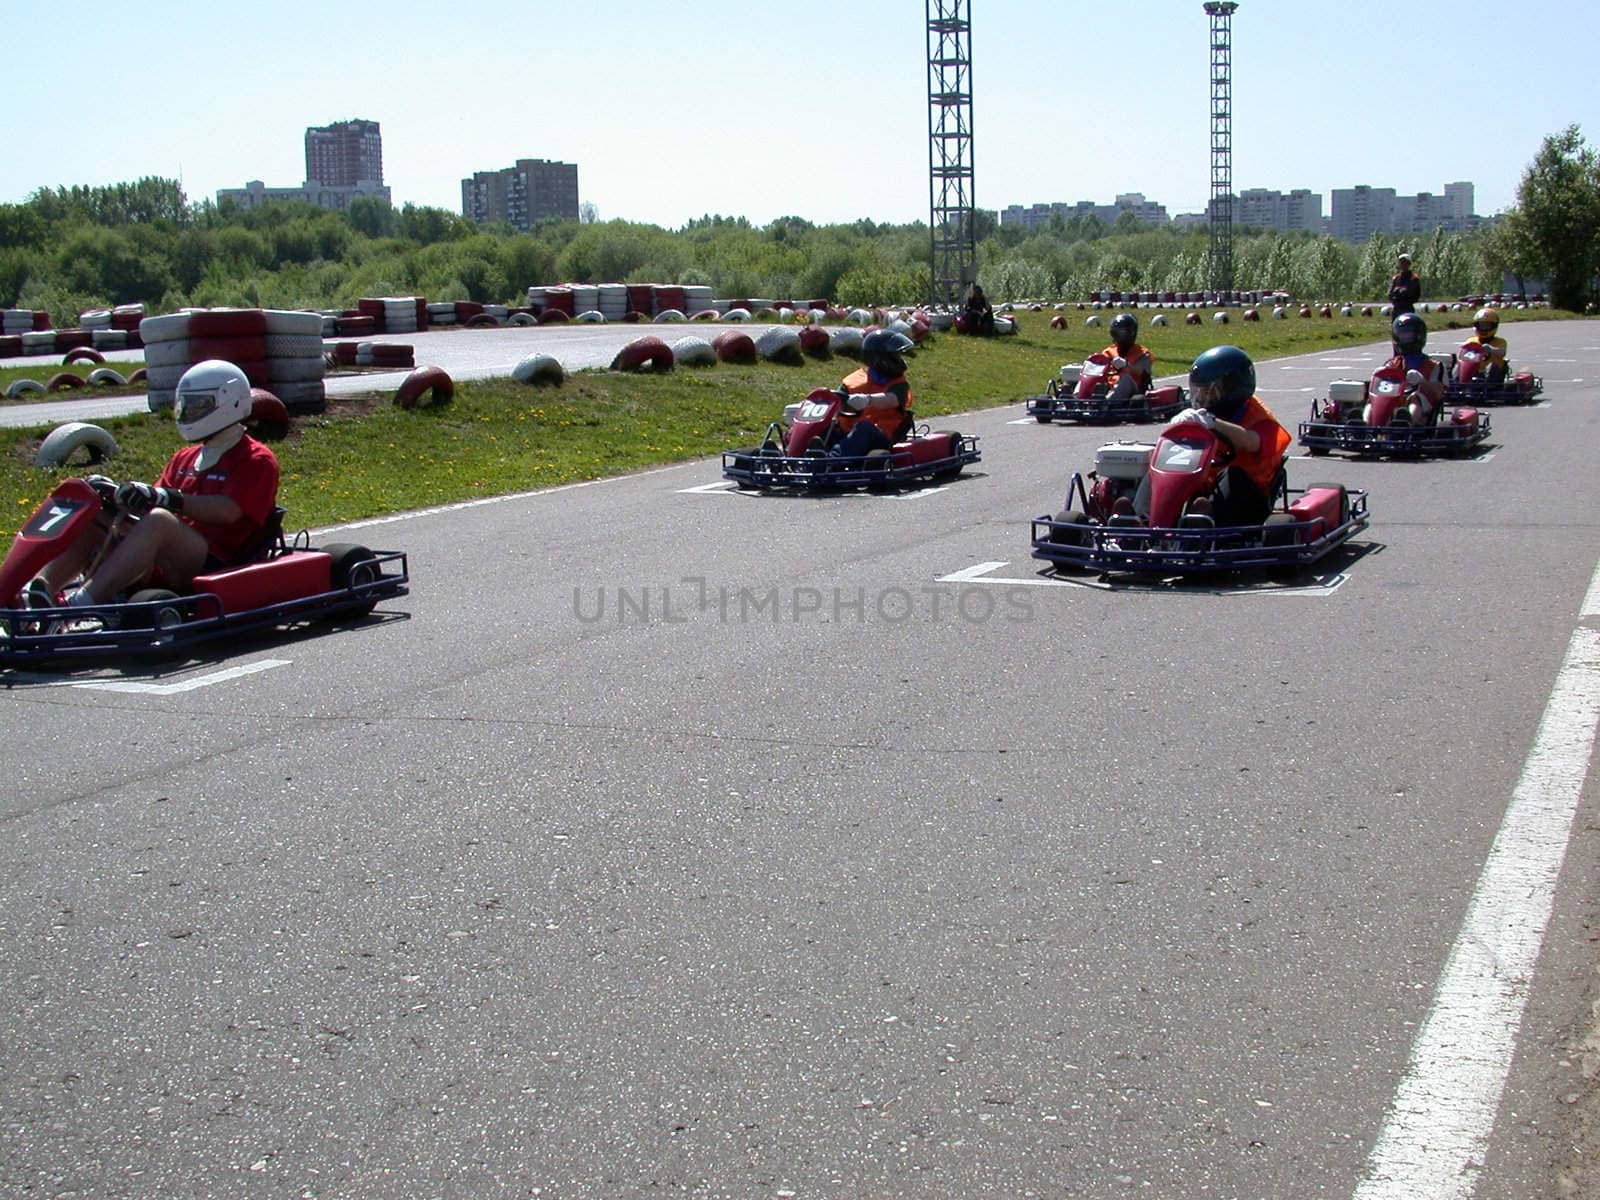 The competitions on karting. auto sport. no trademarks